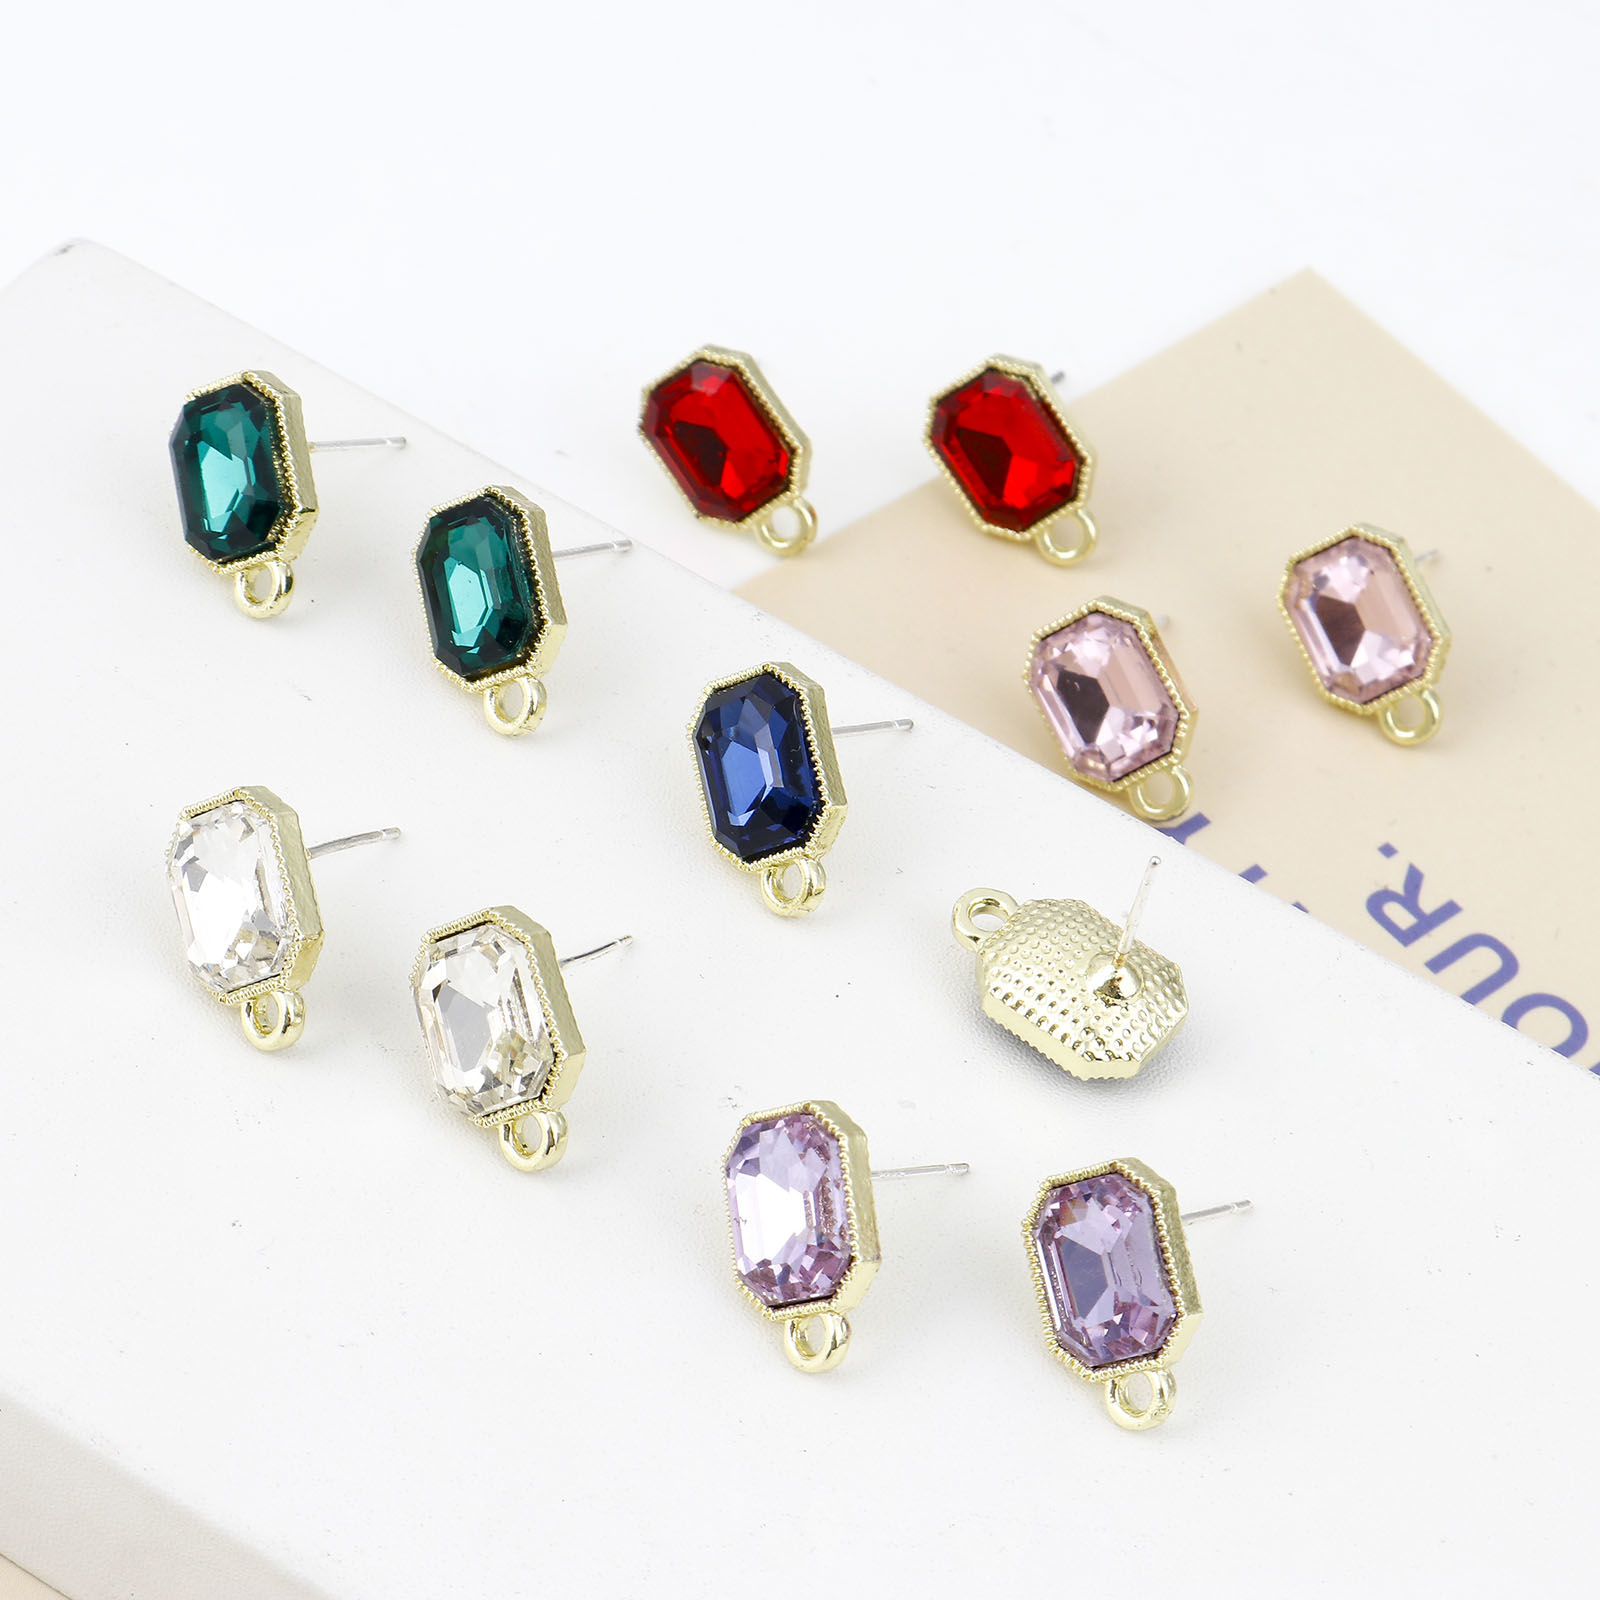 Picture of Zinc Based Alloy & Glass Geometry Series Ear Post Stud Earrings Findings Octagon Gold Plated Multicolor W/ Loop 15mm x 10mm, Post/ Wire Size: 0.7mm, 6 PCs